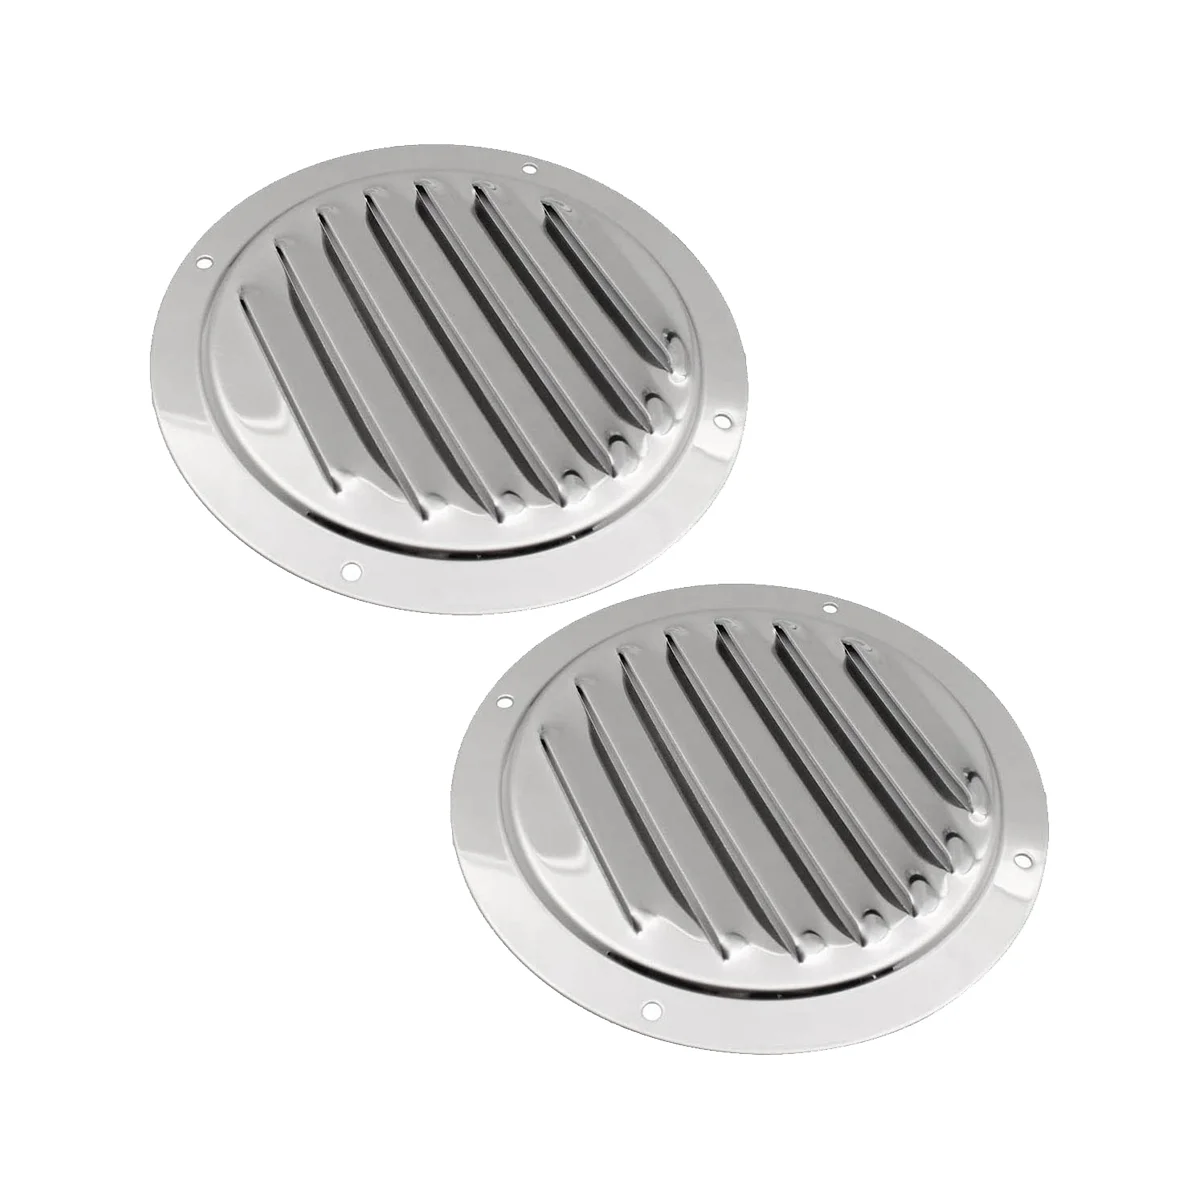 

5Inch Round Louvered Air Vent, 316 Stainless Steel Marine Boat Vent Cover, 2 Pcs